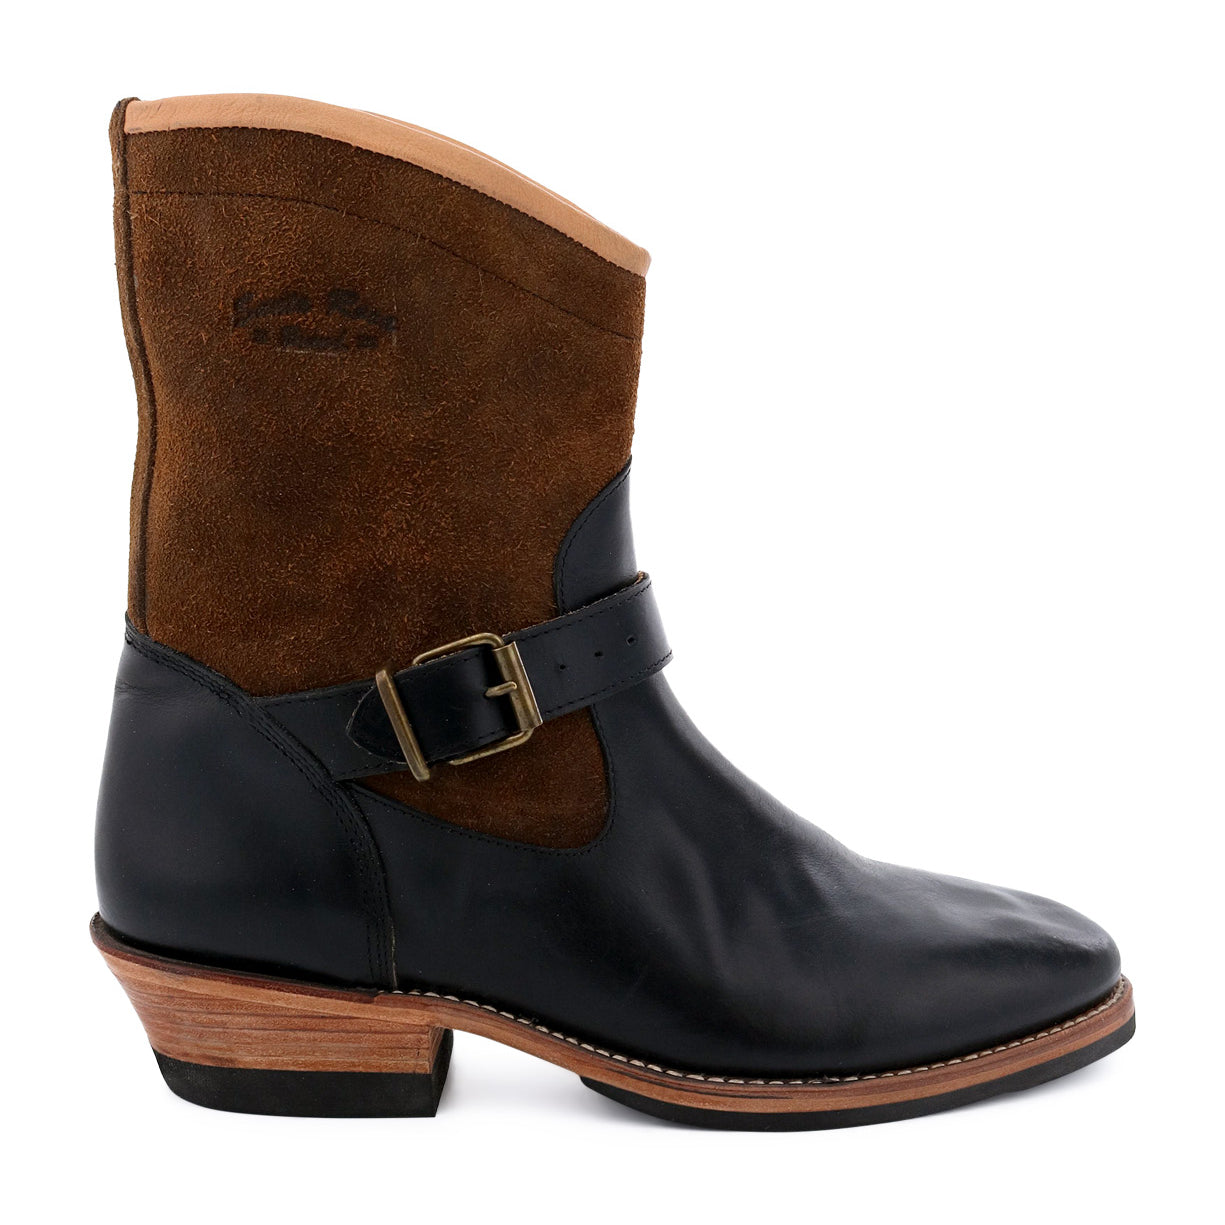 Santa Rosa Brand Carson Harness Boot ankle boot with brown suede upper and buckle detail, featuring Goodyear welt construction.